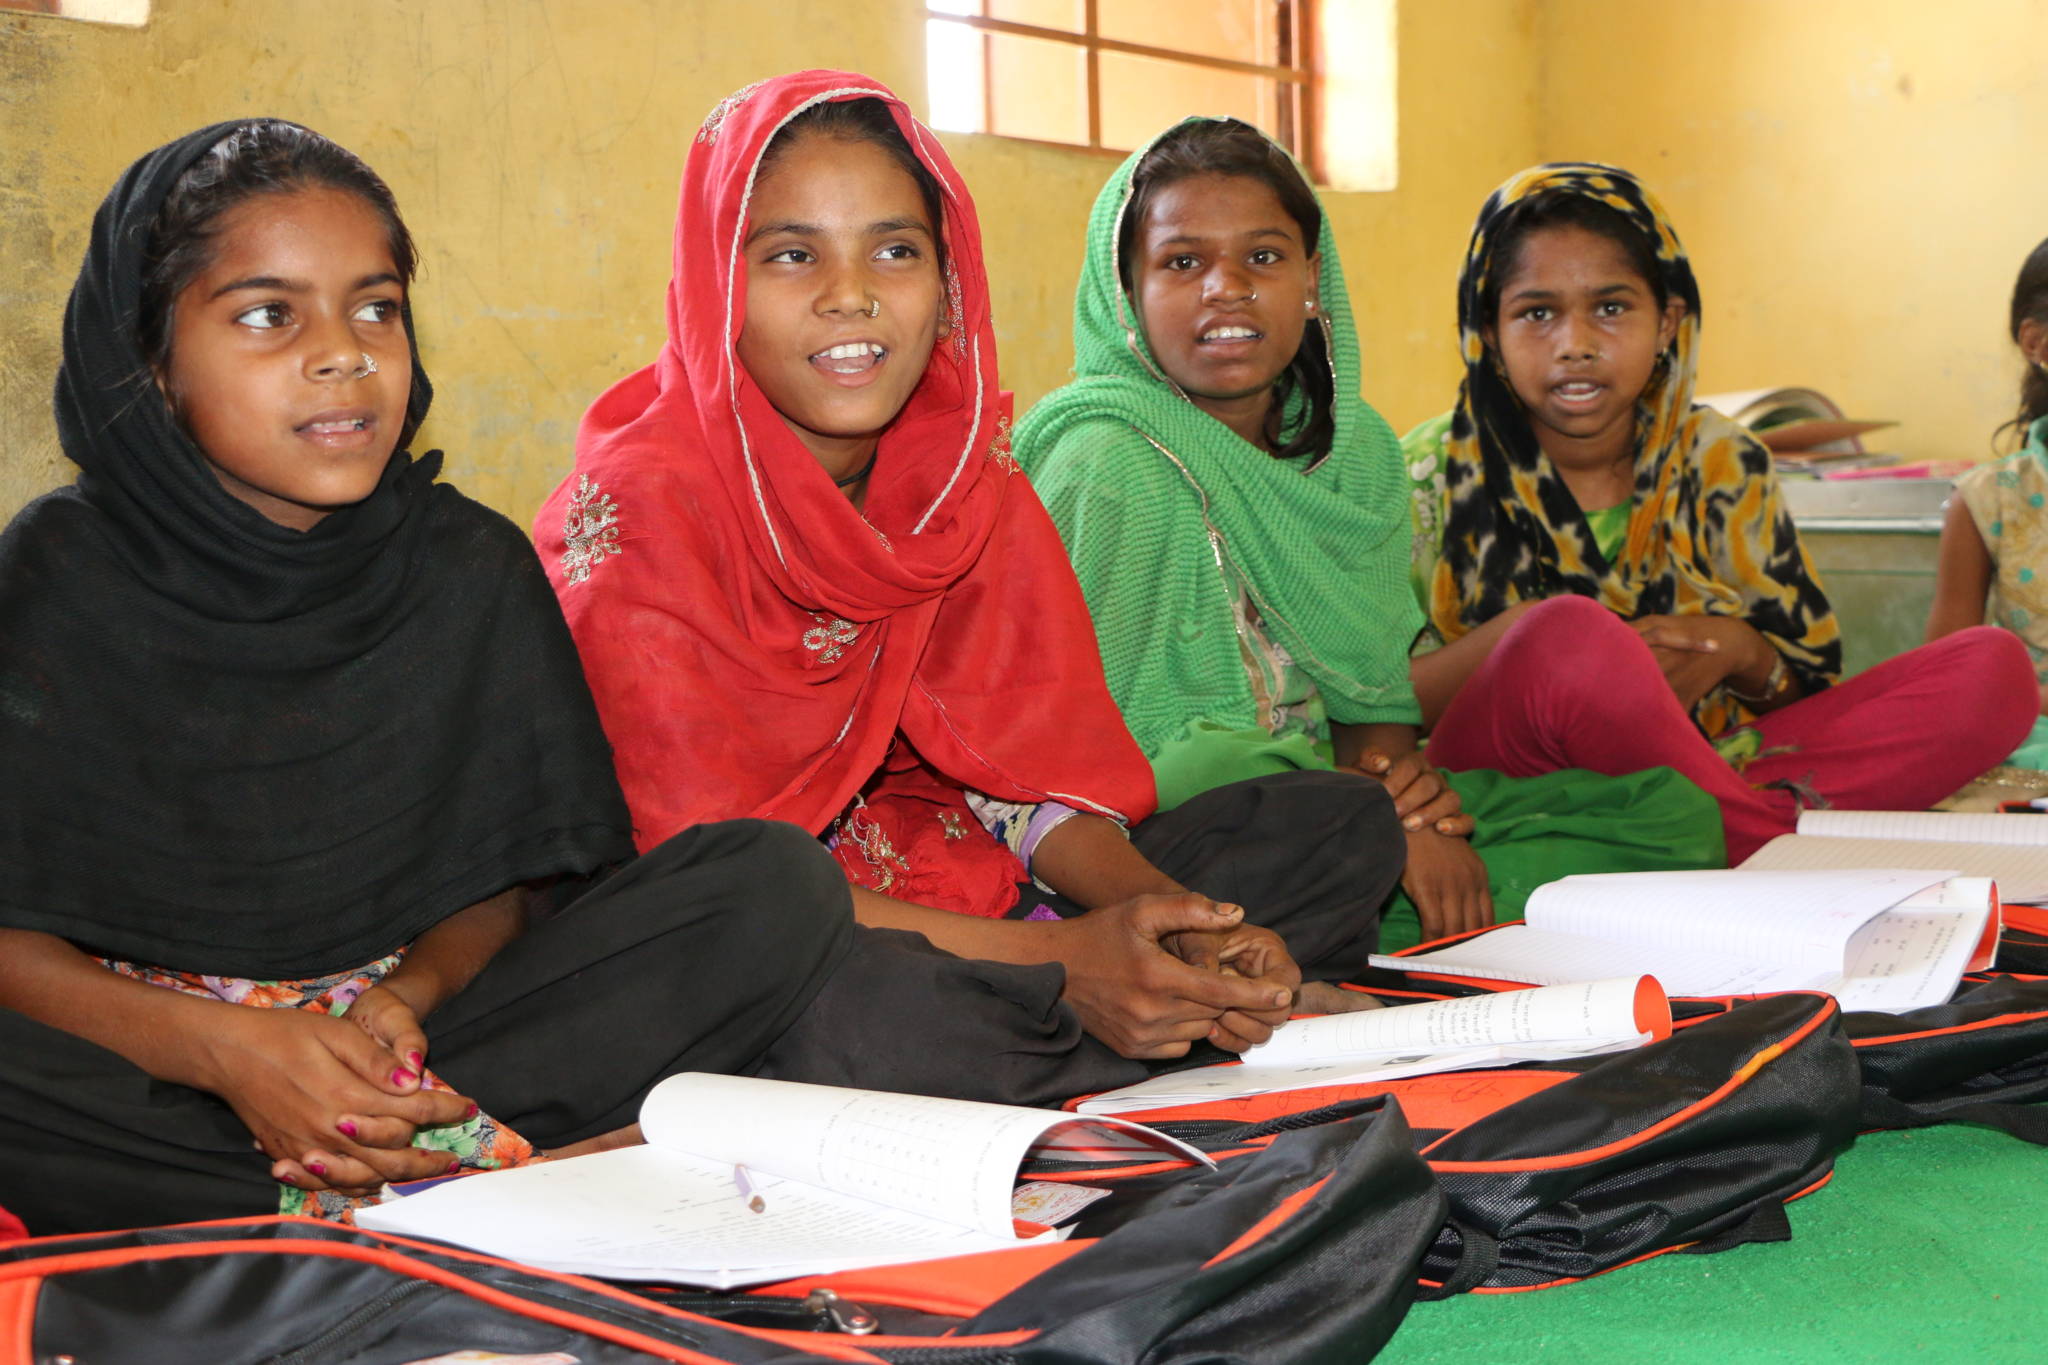 Girls enjoying their class at a UDAAN learning centers.